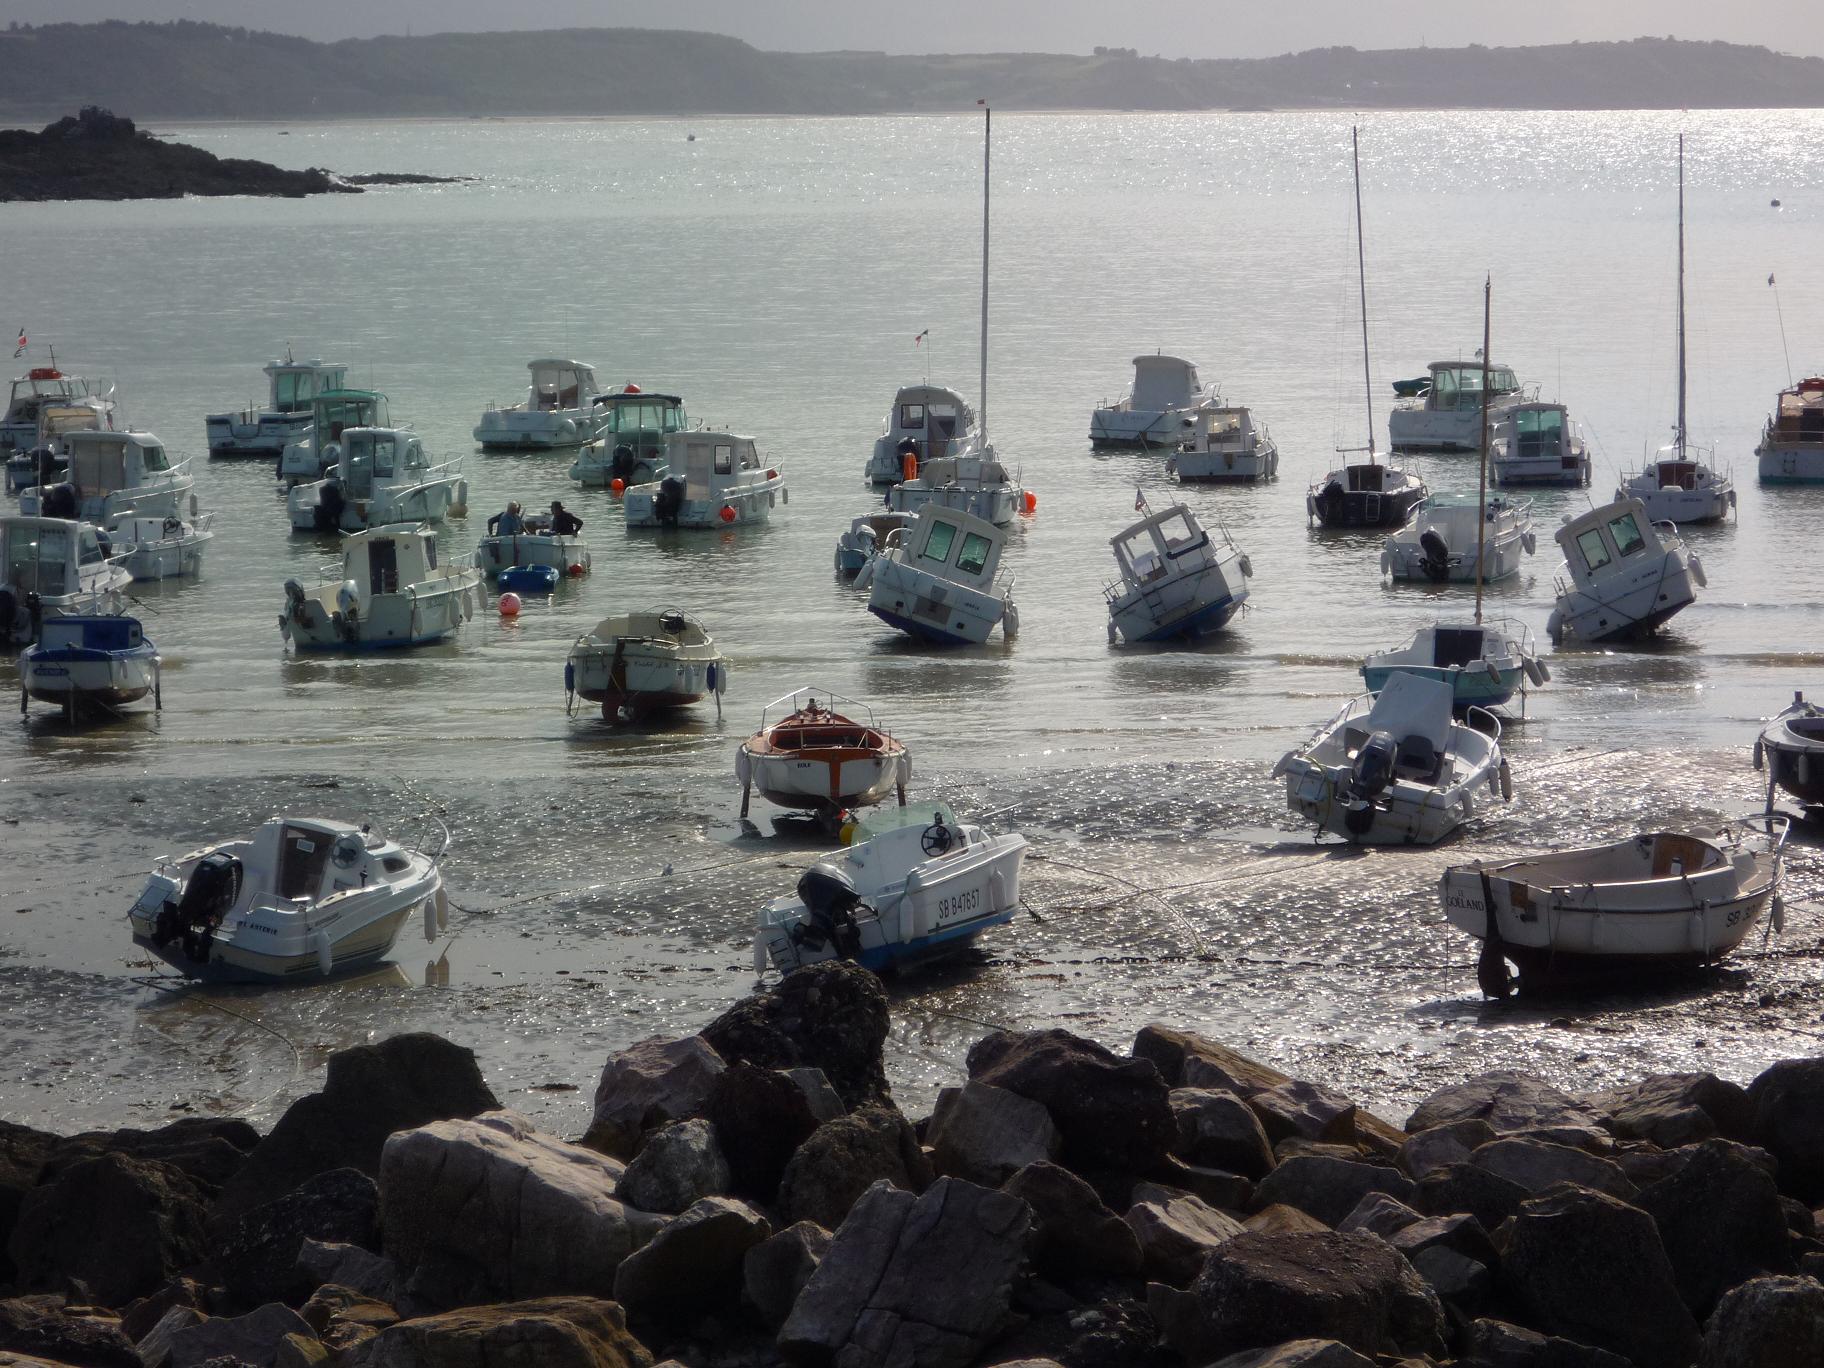 Boats in the tide - Erquy France